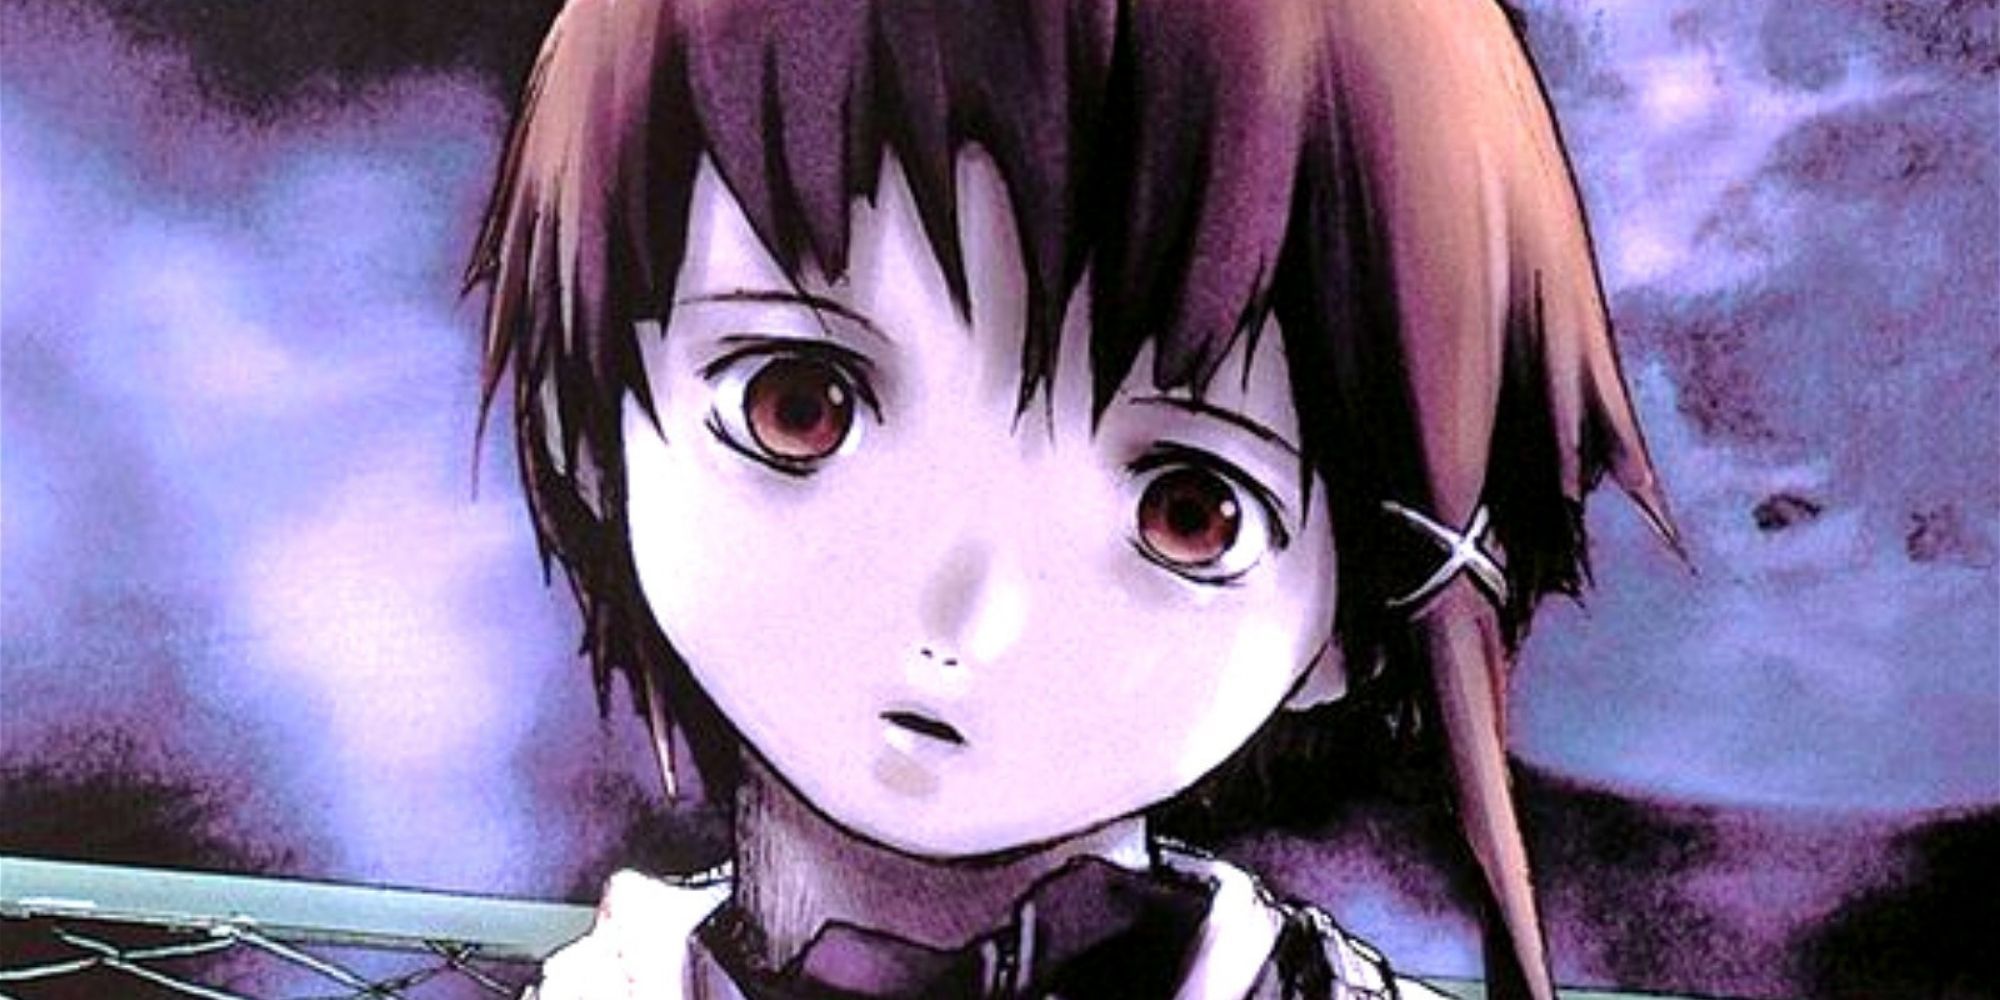 Lain from Serial Experiments Lain